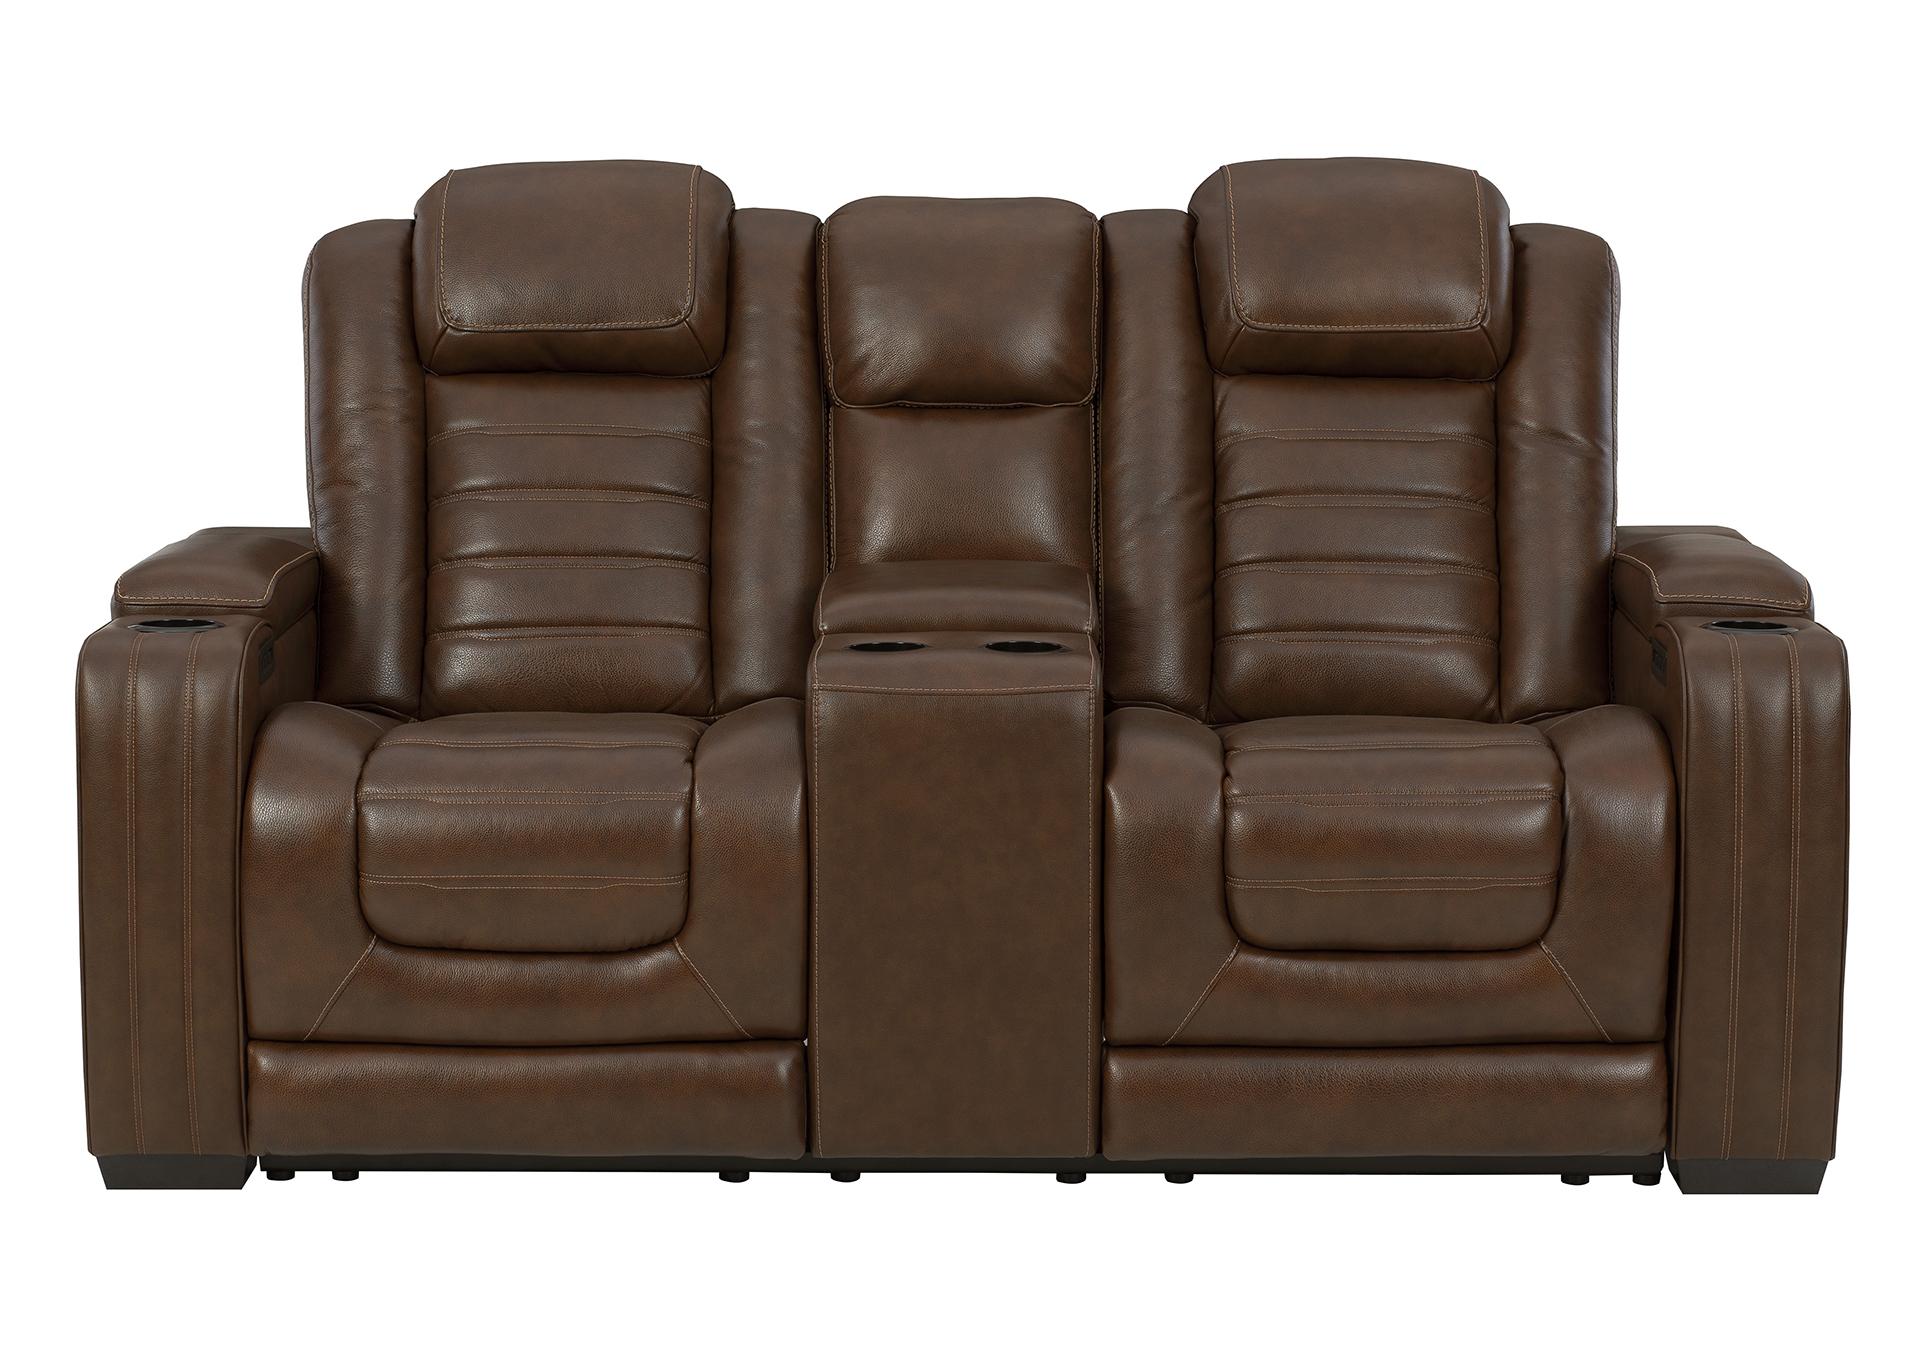 BACKTRACK CHOCOLATE LEATHER POWER RECLINING CONSOLE LOVESEAT